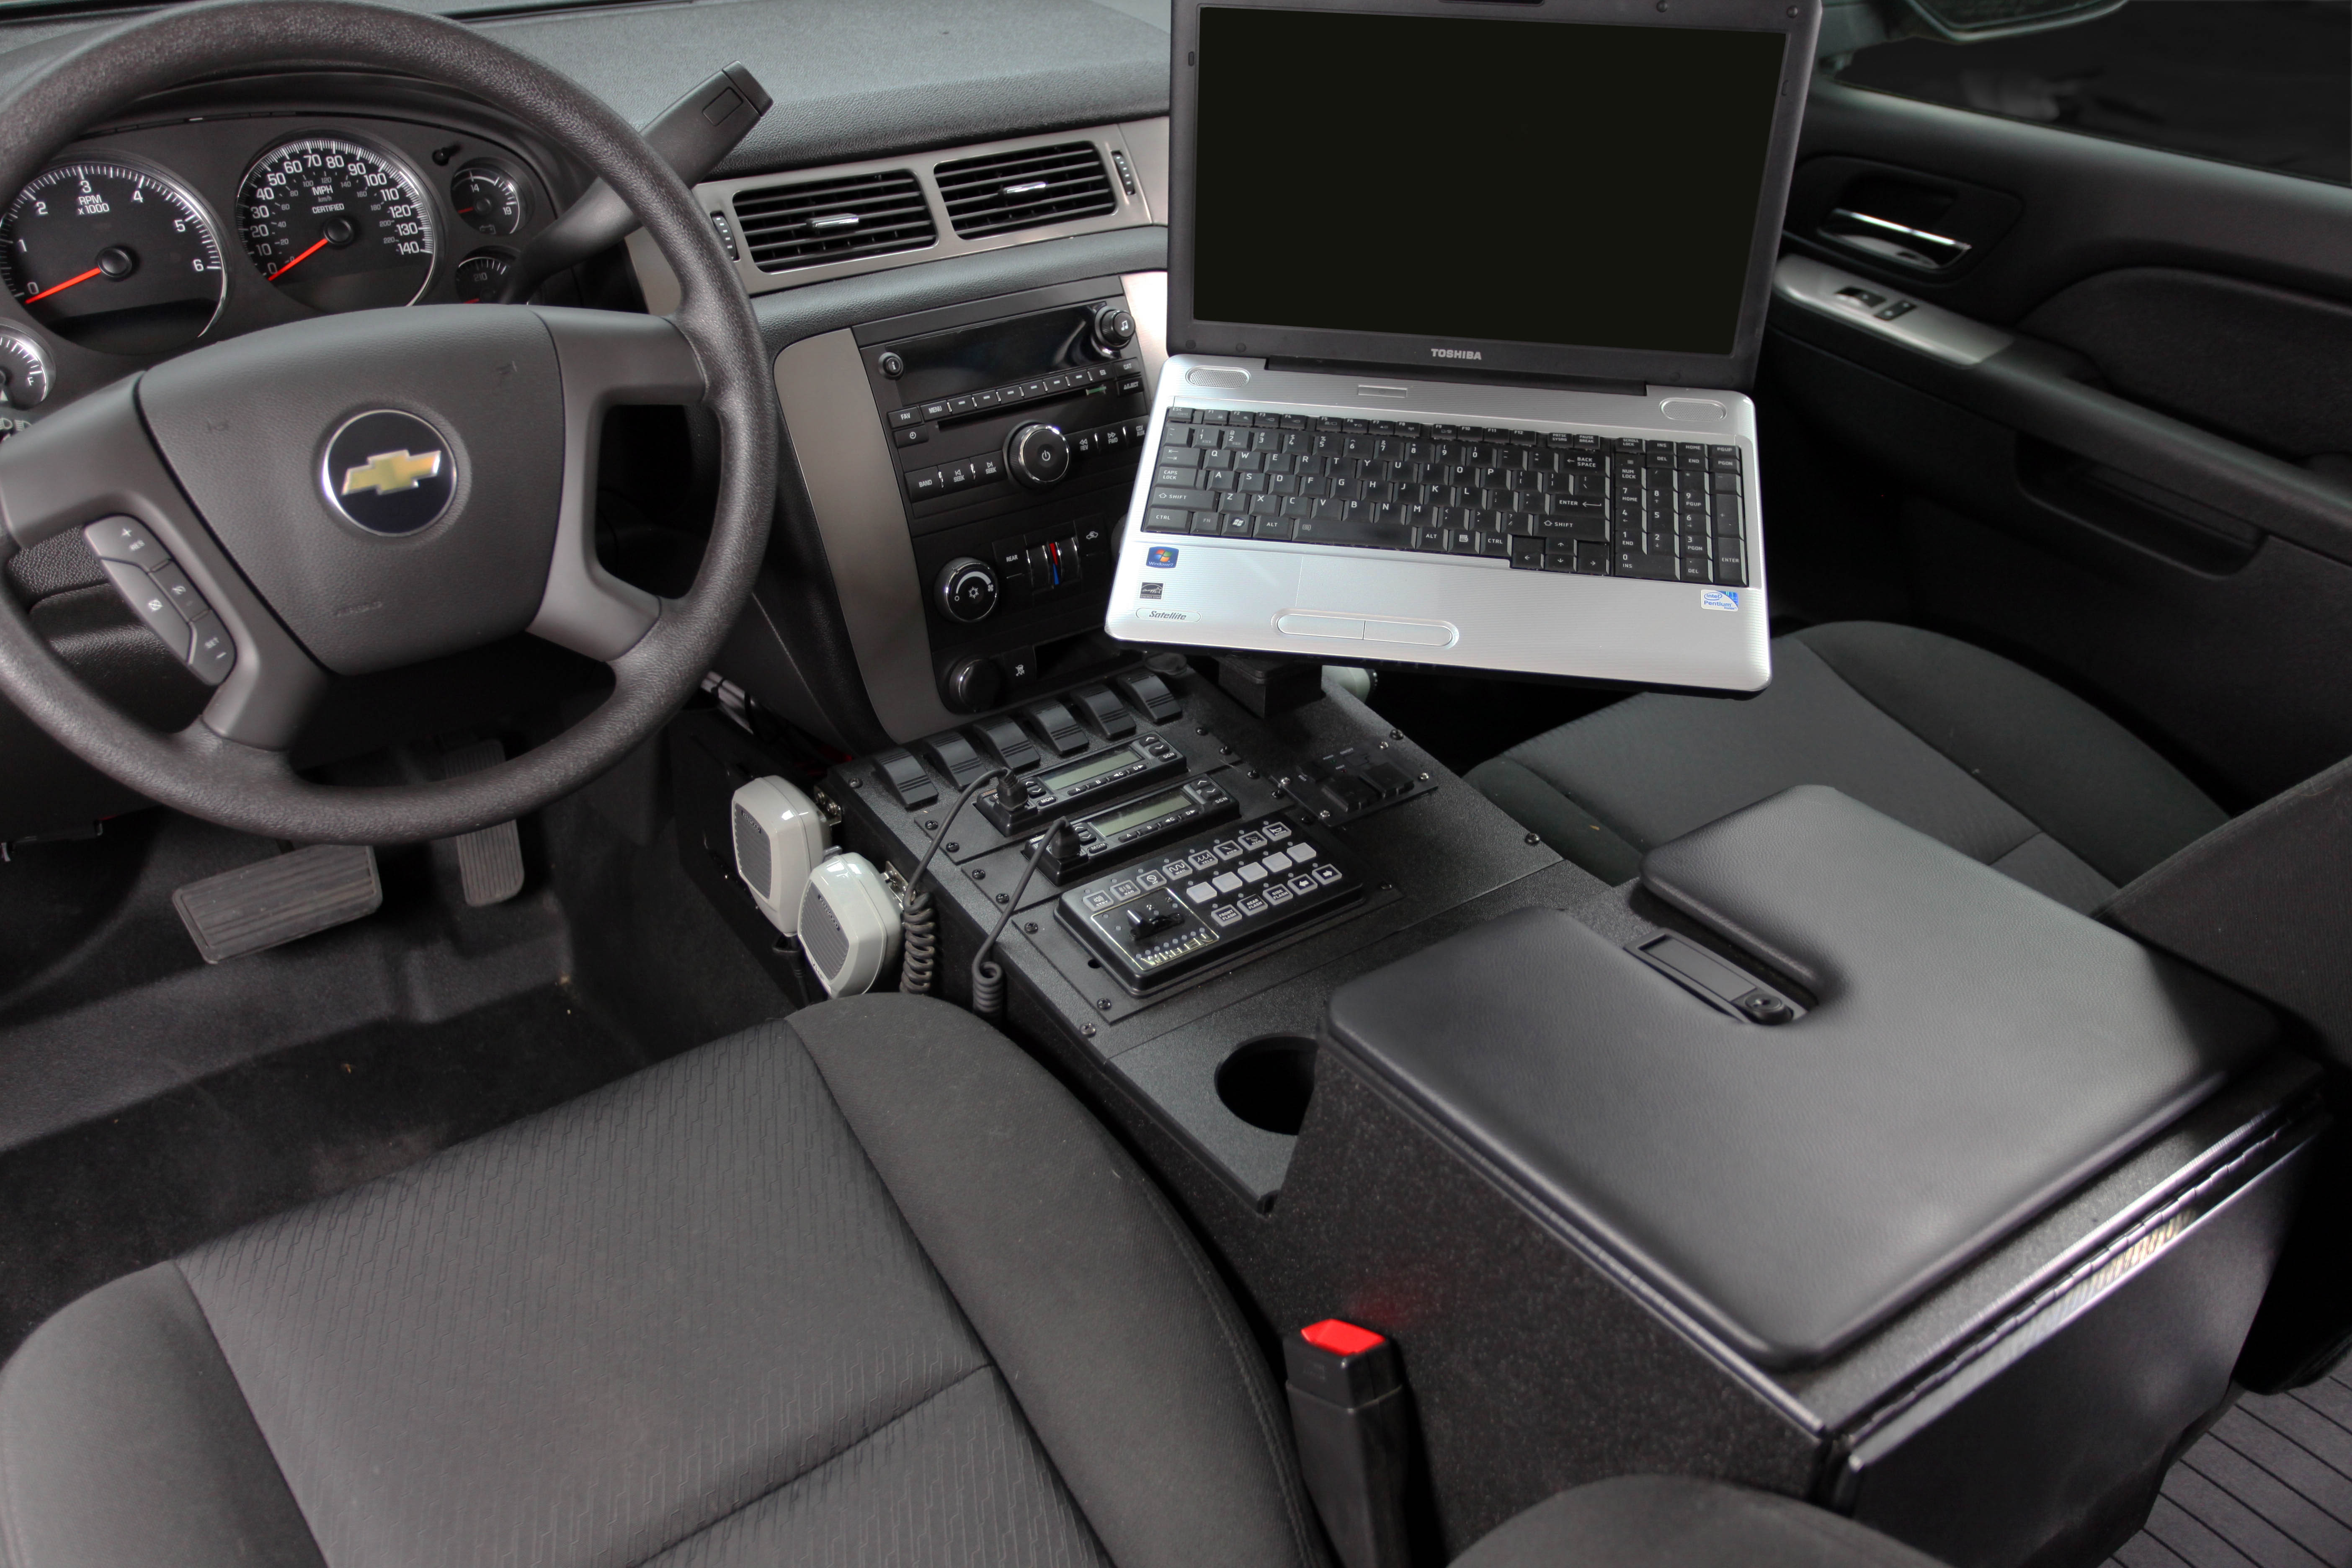 Plastix Plus form-fits each console to the vehicle model, such as in this Chevy Tahoe.